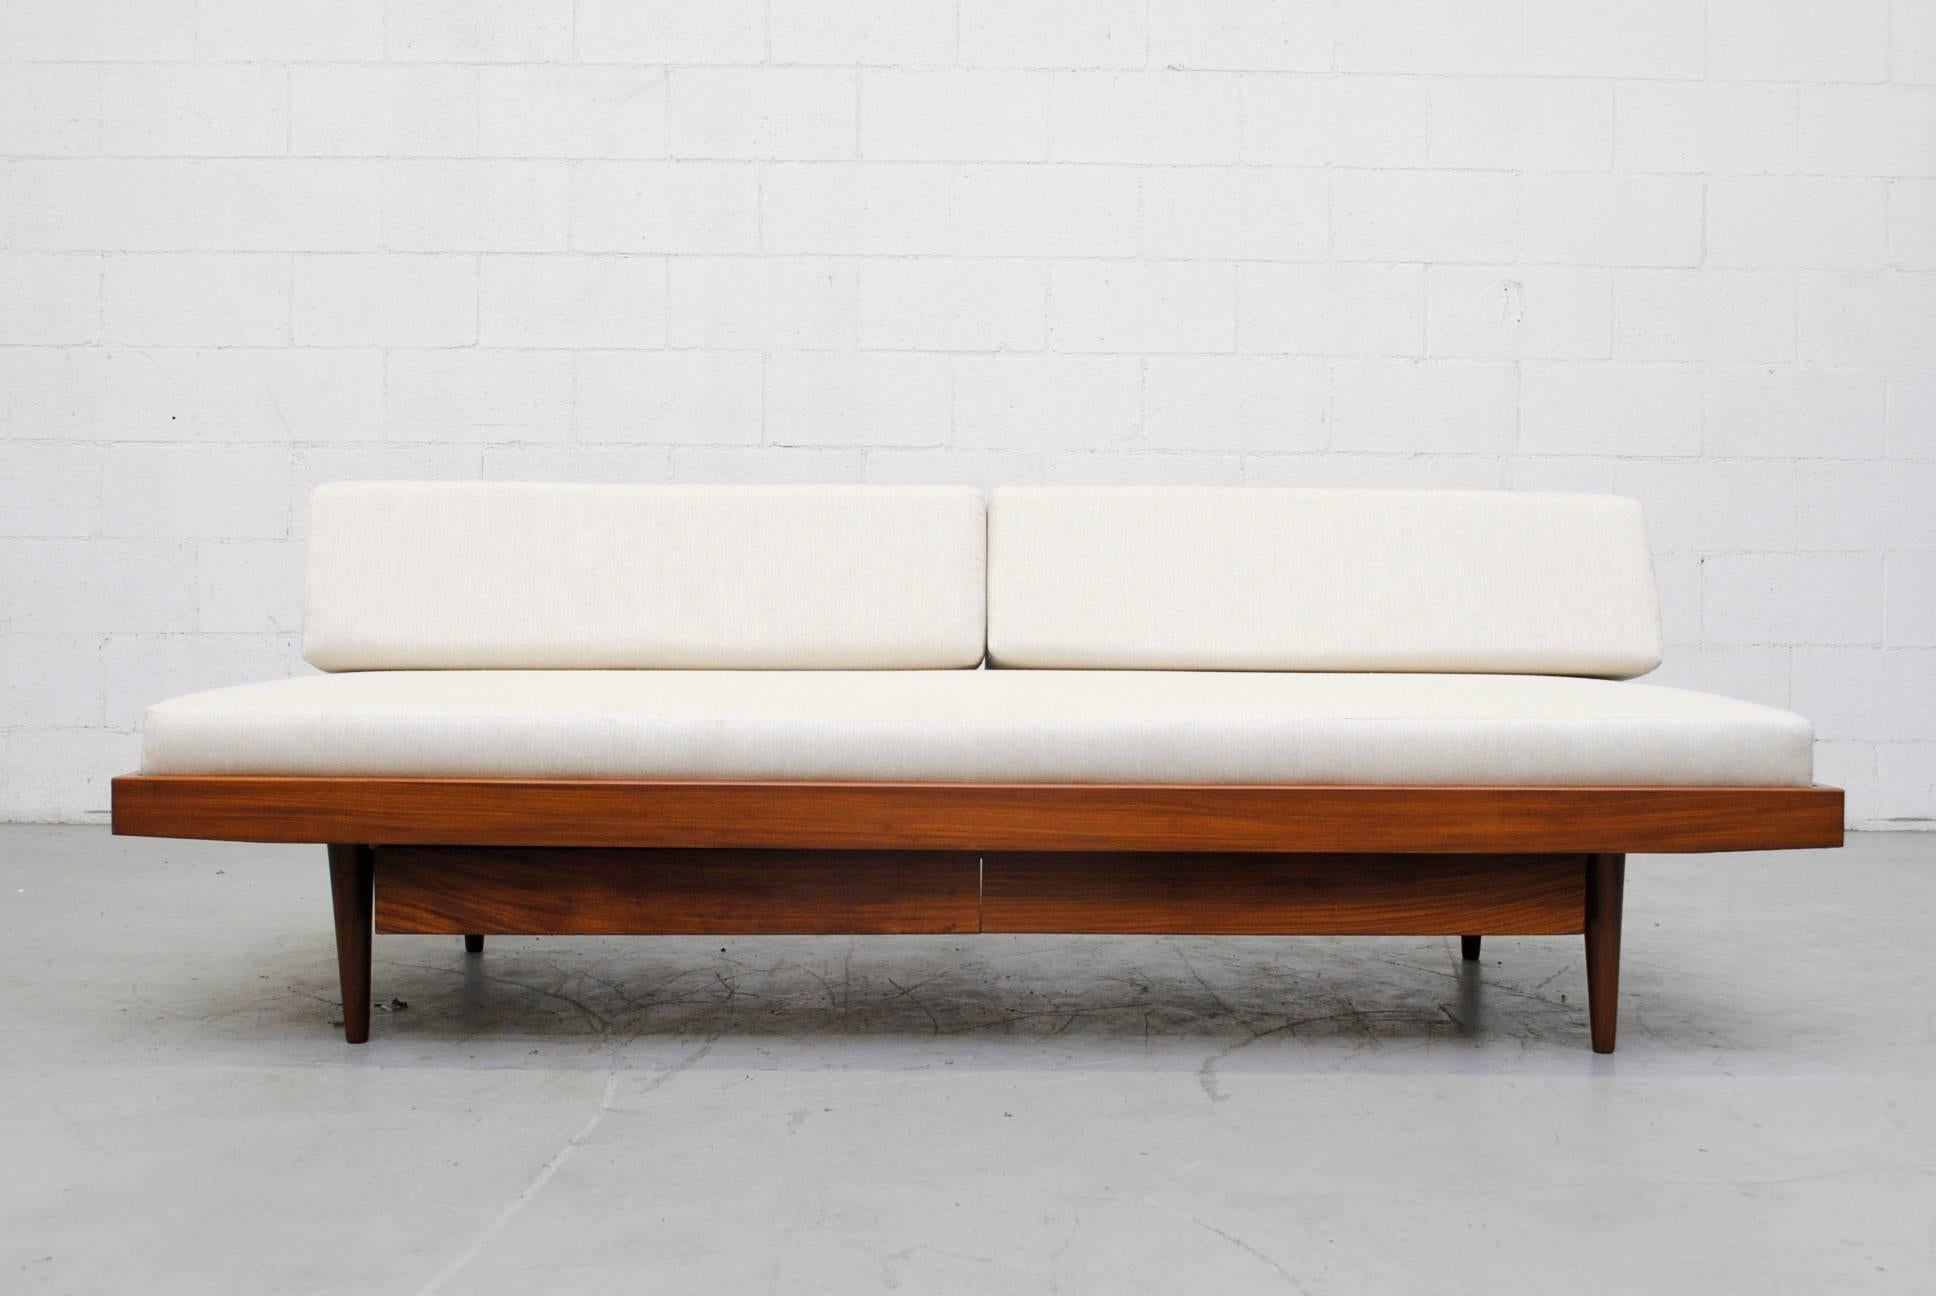 Lightly refinished midcentury teak daybed with lower double storage drawers and new bone white upholstered mattress and bolsters. Good original condition.